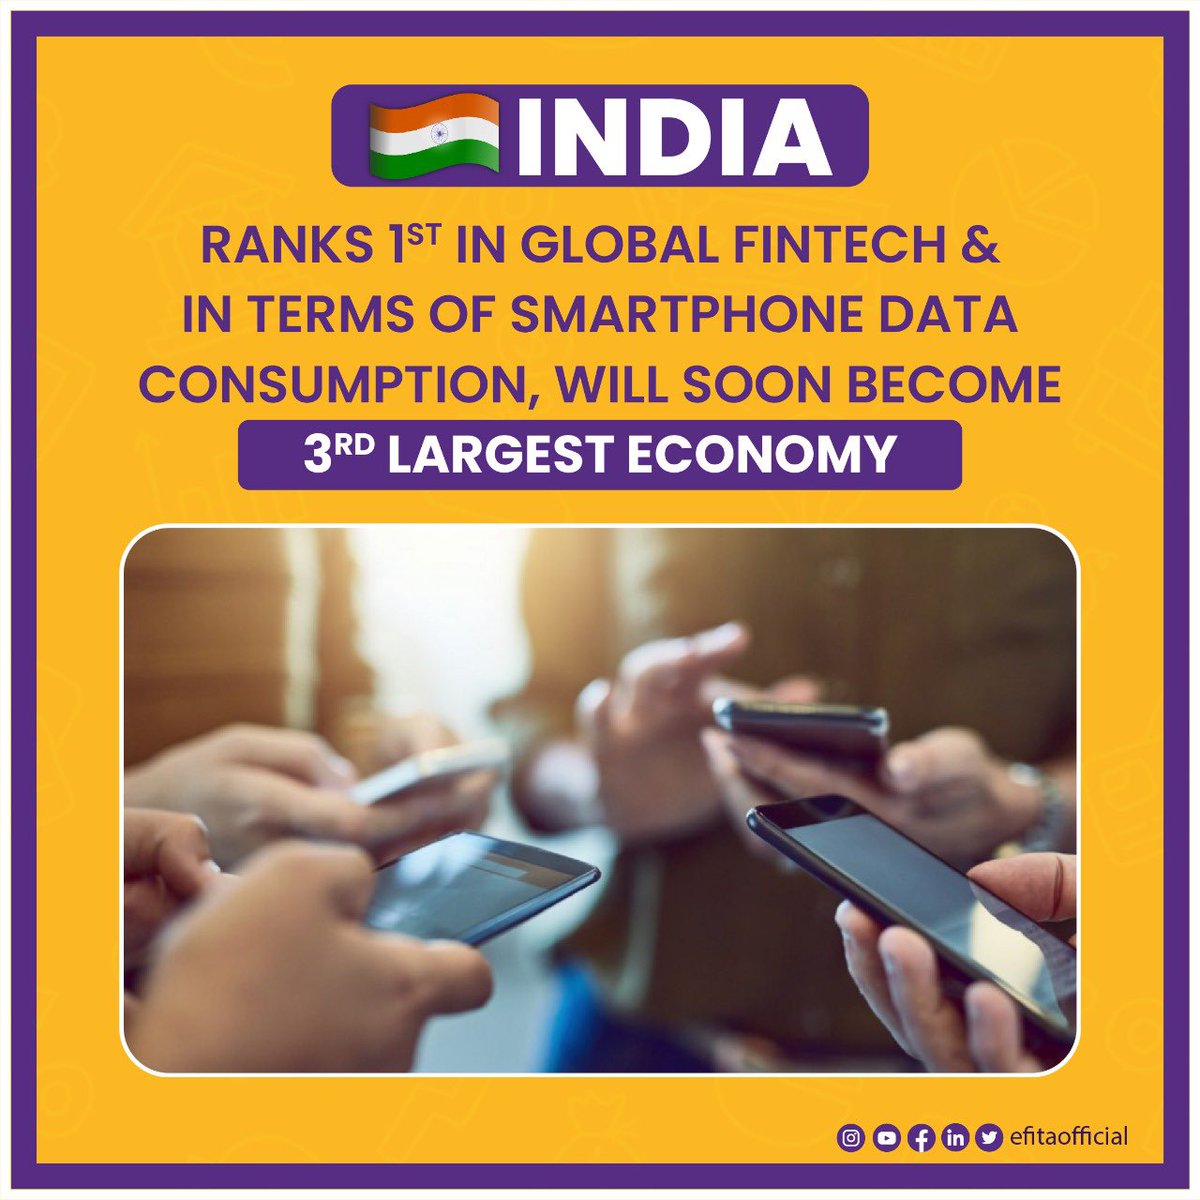 “According to Morgan Stanley, India is moving towards becoming the 3rd LARGEST ECONOMY in the next 4-5 years”
.
.
.
#finance #efita #indianews #globalfintech #financialadvisor #internetnews #funfacts #economy #knowledge #dataconsumption #generalknowledge